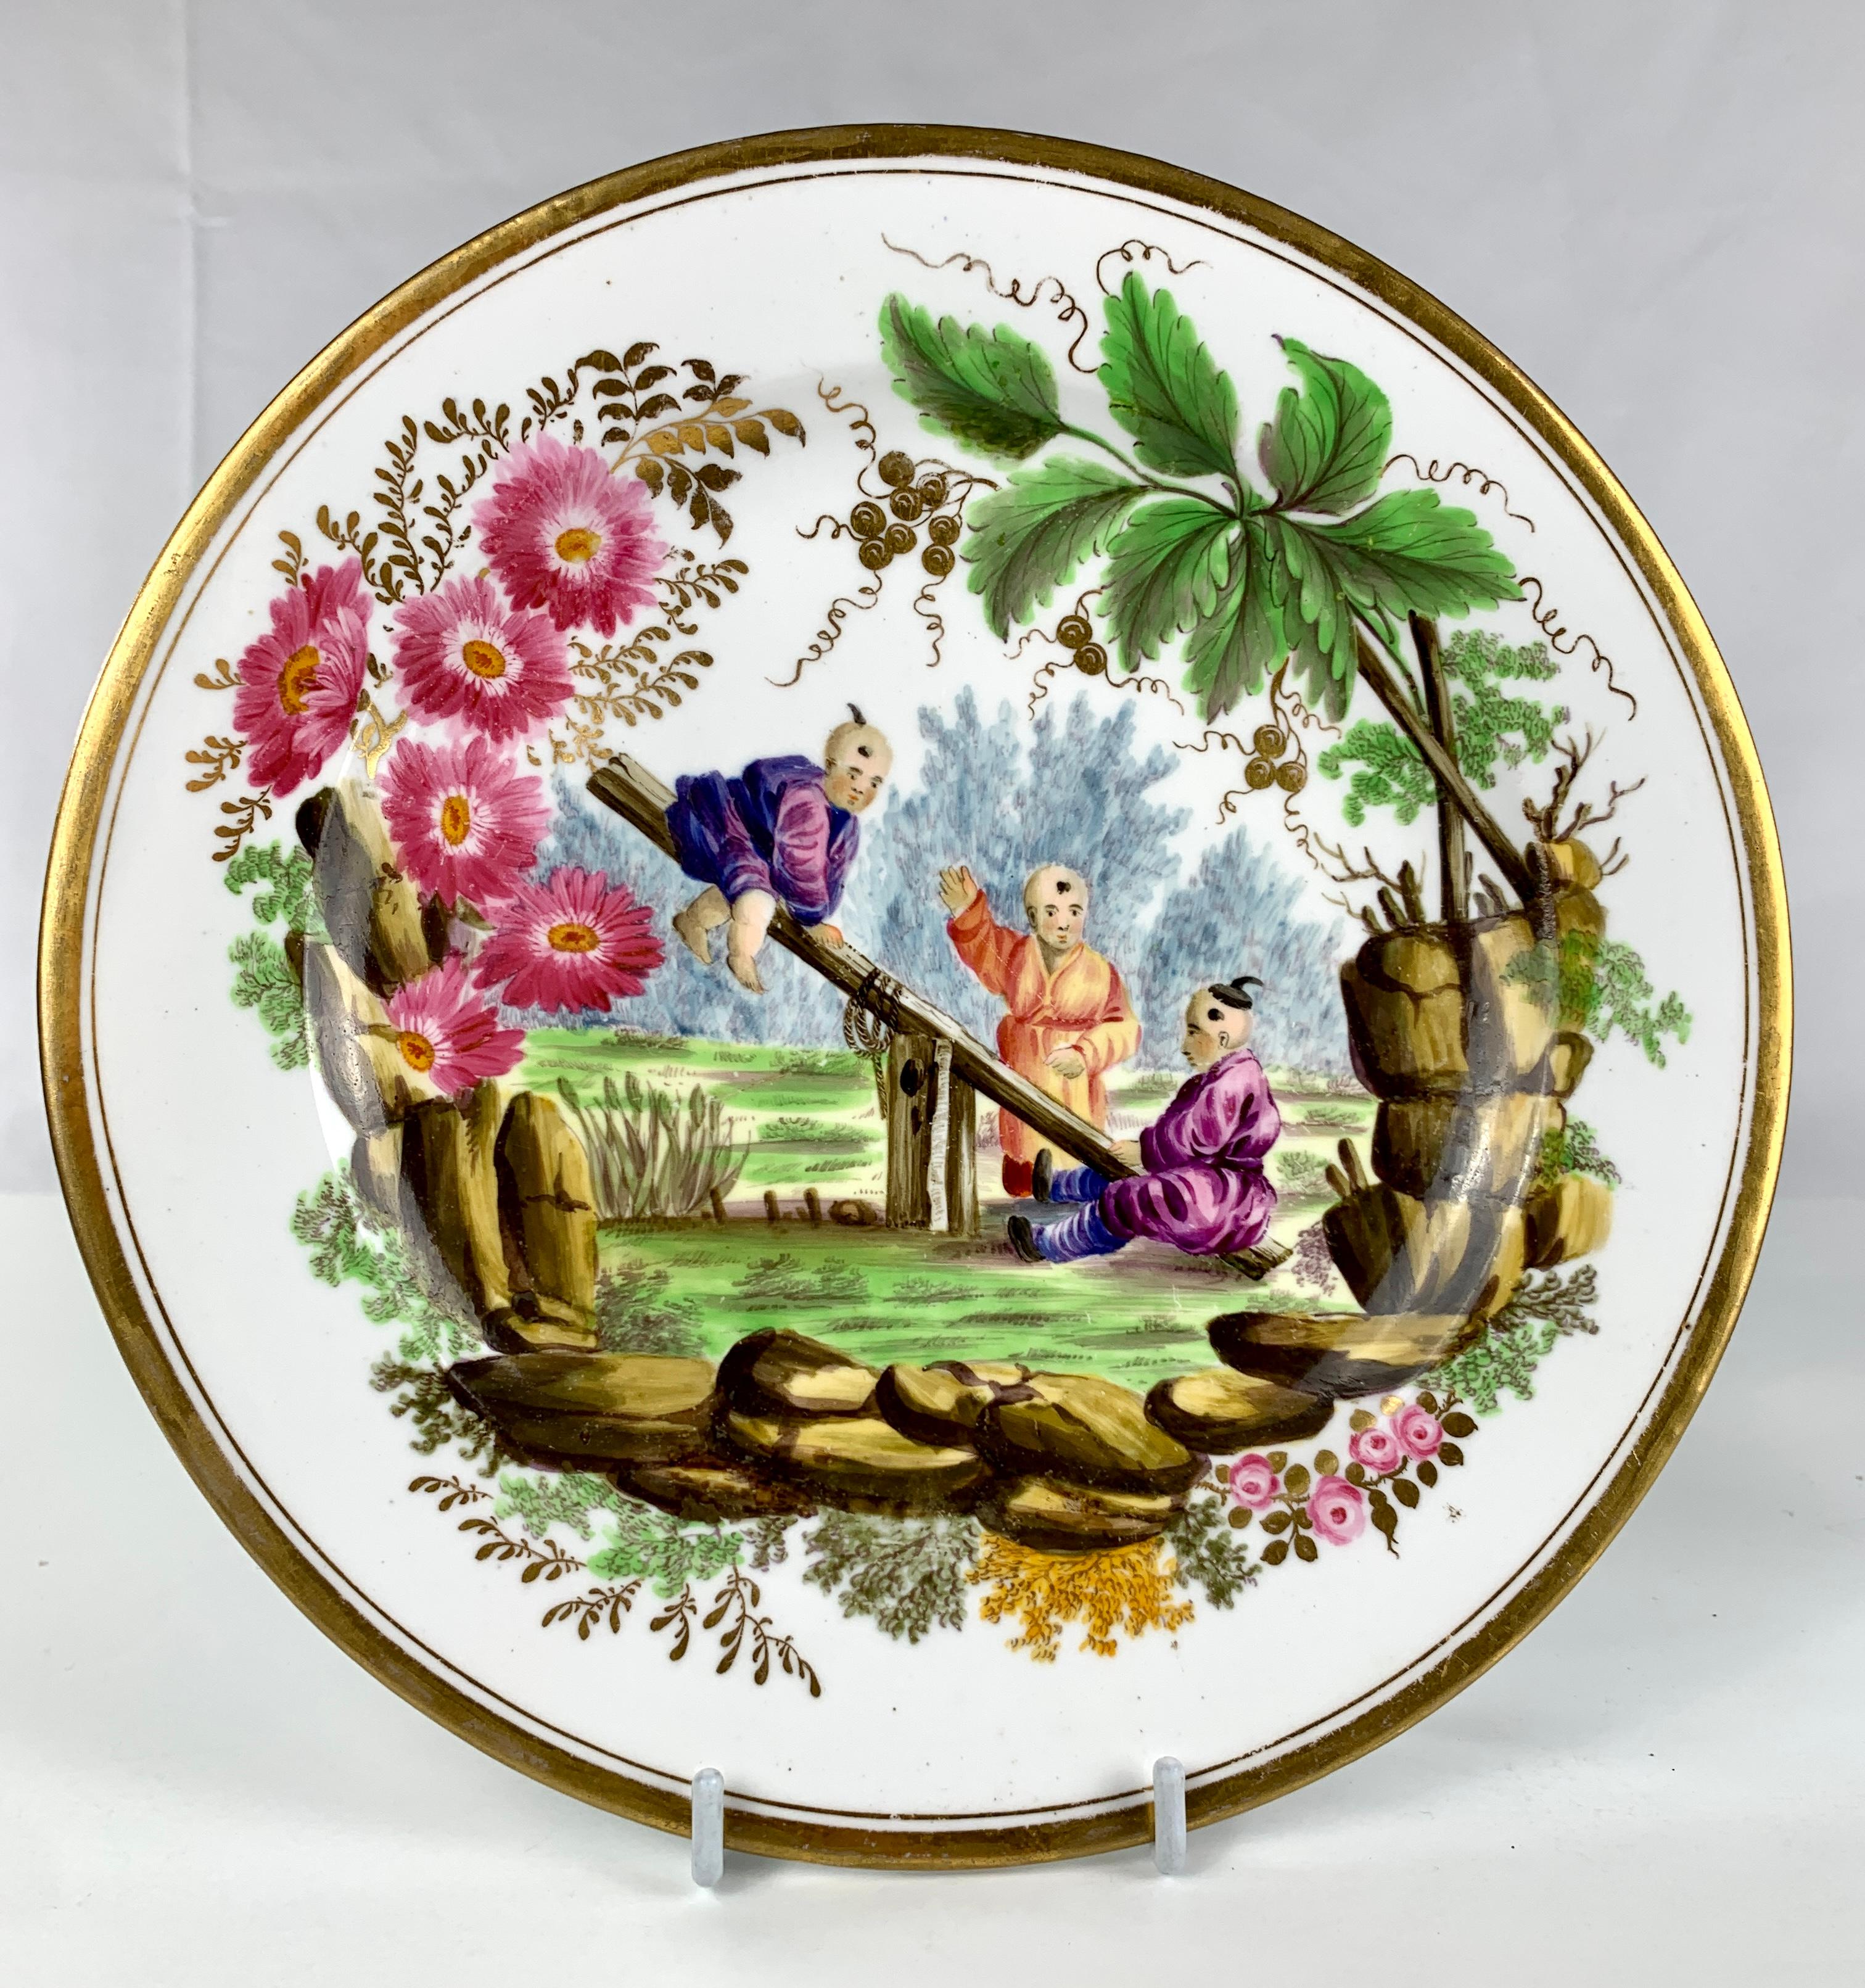 These two Minton porcelain dishes are exceptional masterpieces of the ceramic art form. The chinoiserie scenes, painted by hand, exhibit intricate details, vibrant colors, and a playful spirit. One dish features a young boy running in a field, while